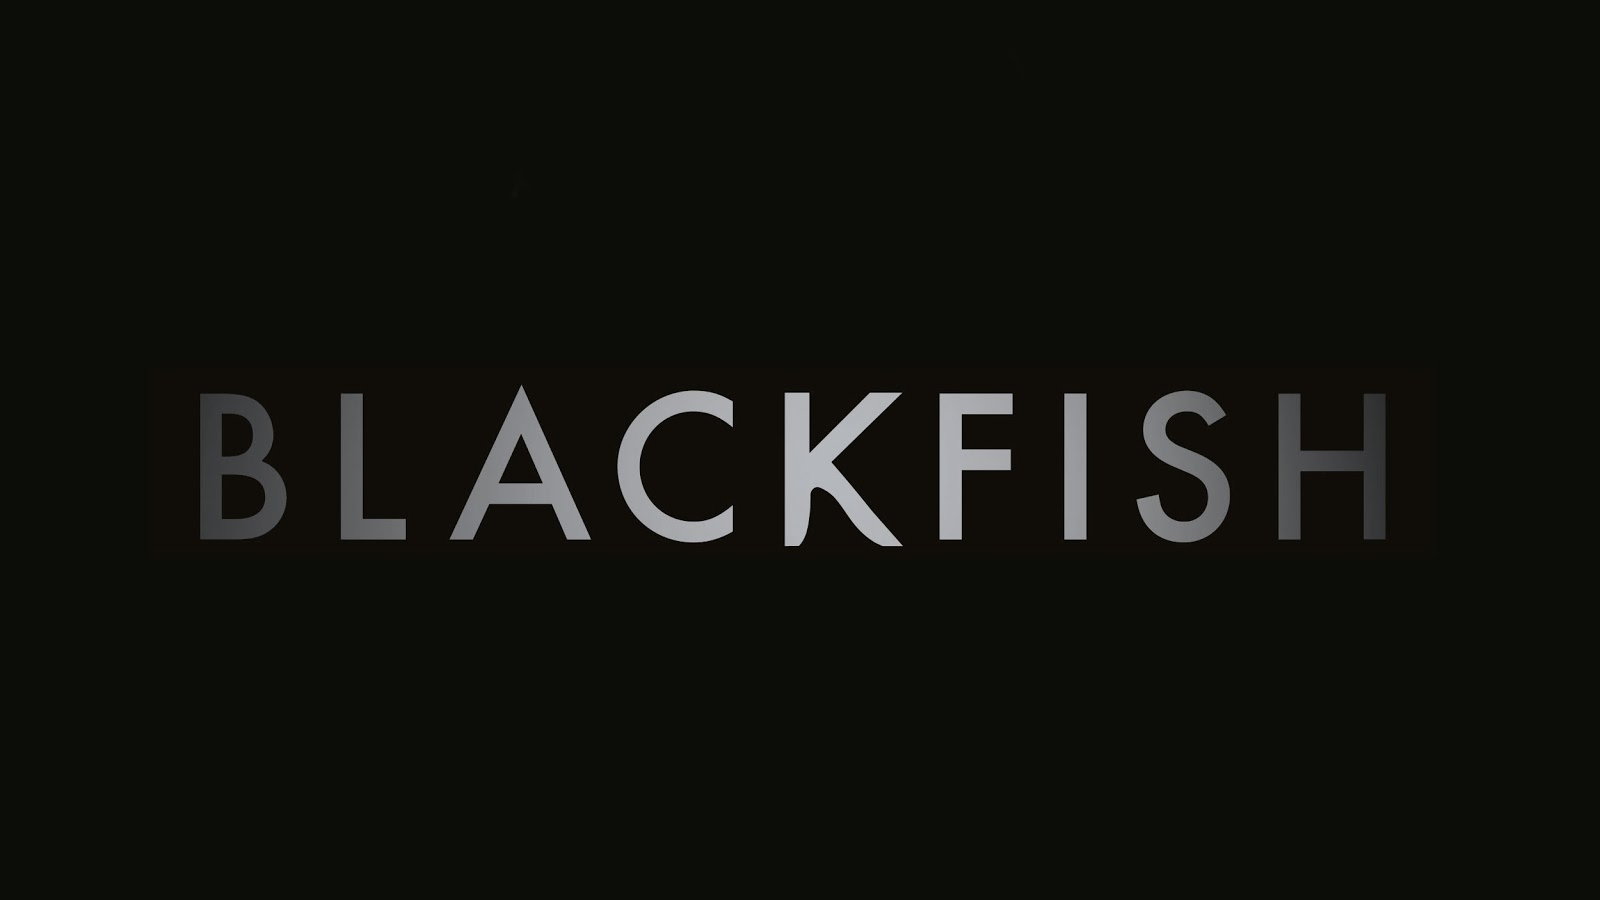 Let S Think Critically Blackfish The Power Of Film